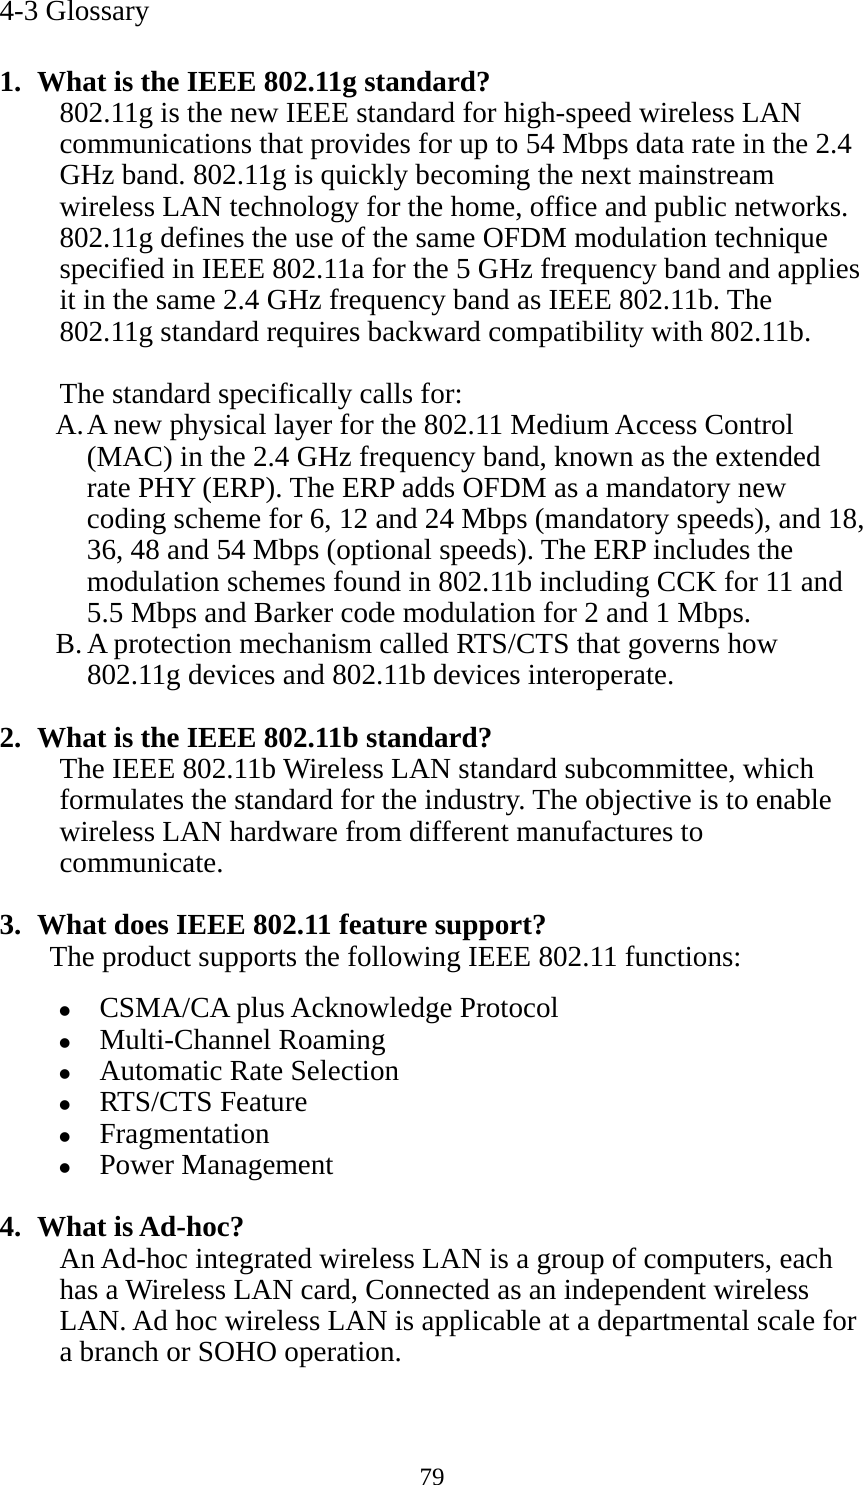  794-3 Glossary  1. What is the IEEE 802.11g standard? 802.11g is the new IEEE standard for high-speed wireless LAN communications that provides for up to 54 Mbps data rate in the 2.4 GHz band. 802.11g is quickly becoming the next mainstream wireless LAN technology for the home, office and public networks.   802.11g defines the use of the same OFDM modulation technique specified in IEEE 802.11a for the 5 GHz frequency band and applies it in the same 2.4 GHz frequency band as IEEE 802.11b. The 802.11g standard requires backward compatibility with 802.11b.  The standard specifically calls for:   A. A new physical layer for the 802.11 Medium Access Control (MAC) in the 2.4 GHz frequency band, known as the extended rate PHY (ERP). The ERP adds OFDM as a mandatory new coding scheme for 6, 12 and 24 Mbps (mandatory speeds), and 18, 36, 48 and 54 Mbps (optional speeds). The ERP includes the modulation schemes found in 802.11b including CCK for 11 and 5.5 Mbps and Barker code modulation for 2 and 1 Mbps. B. A protection mechanism called RTS/CTS that governs how 802.11g devices and 802.11b devices interoperate.  2. What is the IEEE 802.11b standard? The IEEE 802.11b Wireless LAN standard subcommittee, which formulates the standard for the industry. The objective is to enable wireless LAN hardware from different manufactures to communicate.  3. What does IEEE 802.11 feature support? The product supports the following IEEE 802.11 functions: z CSMA/CA plus Acknowledge Protocol z Multi-Channel Roaming z Automatic Rate Selection z RTS/CTS Feature z Fragmentation z Power Management  4. What is Ad-hoc? An Ad-hoc integrated wireless LAN is a group of computers, each has a Wireless LAN card, Connected as an independent wireless LAN. Ad hoc wireless LAN is applicable at a departmental scale for a branch or SOHO operation.   